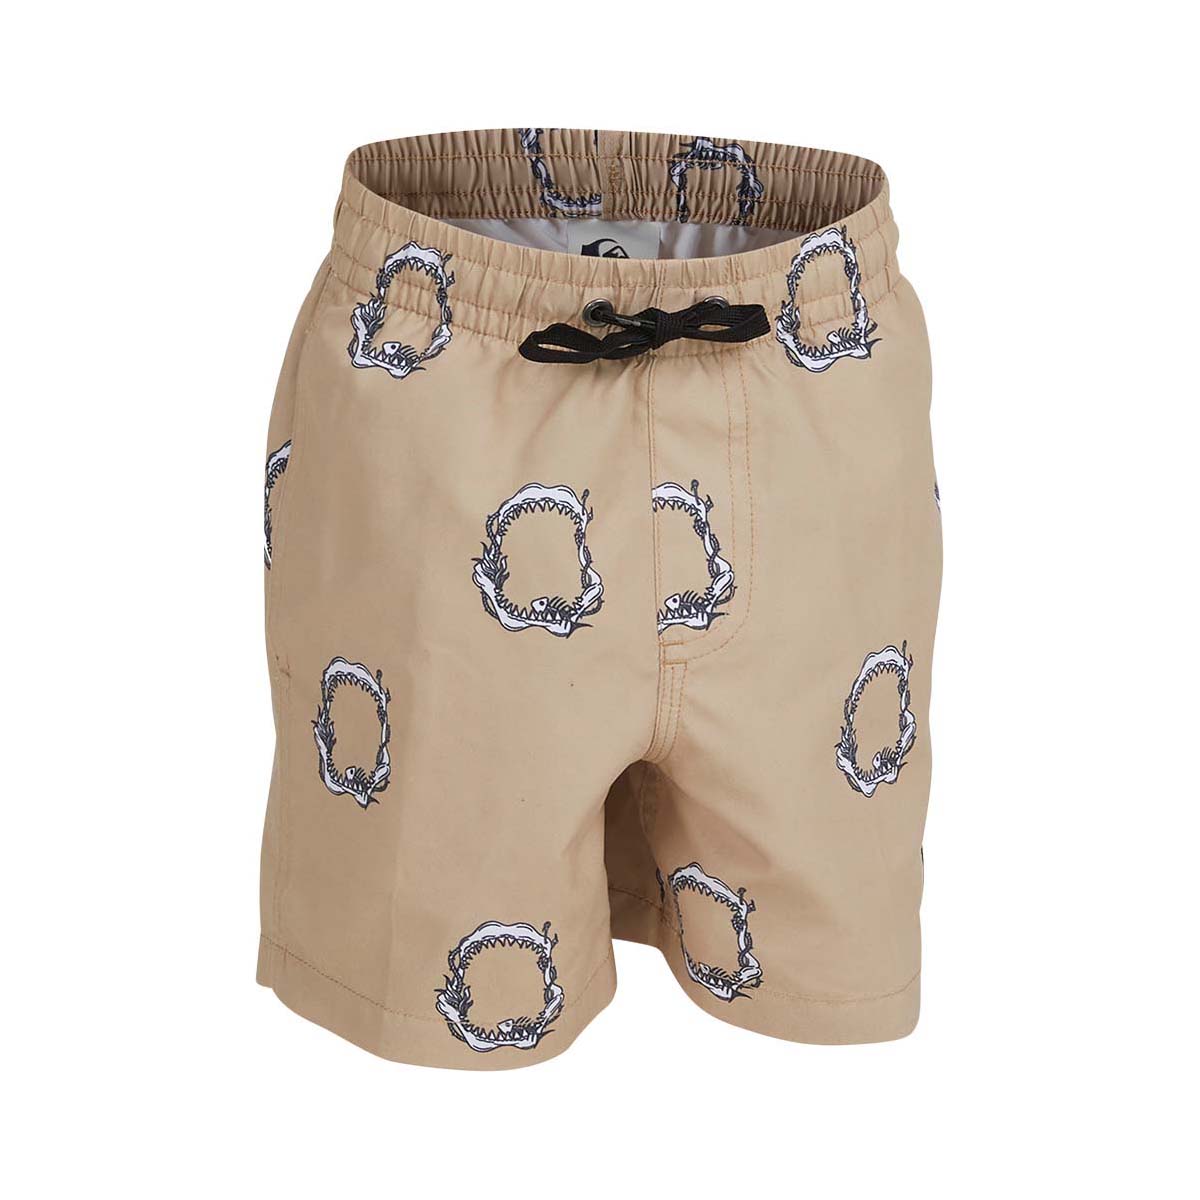 Quiksilver Kids' Tooth Pick Boardshorts Incense 7